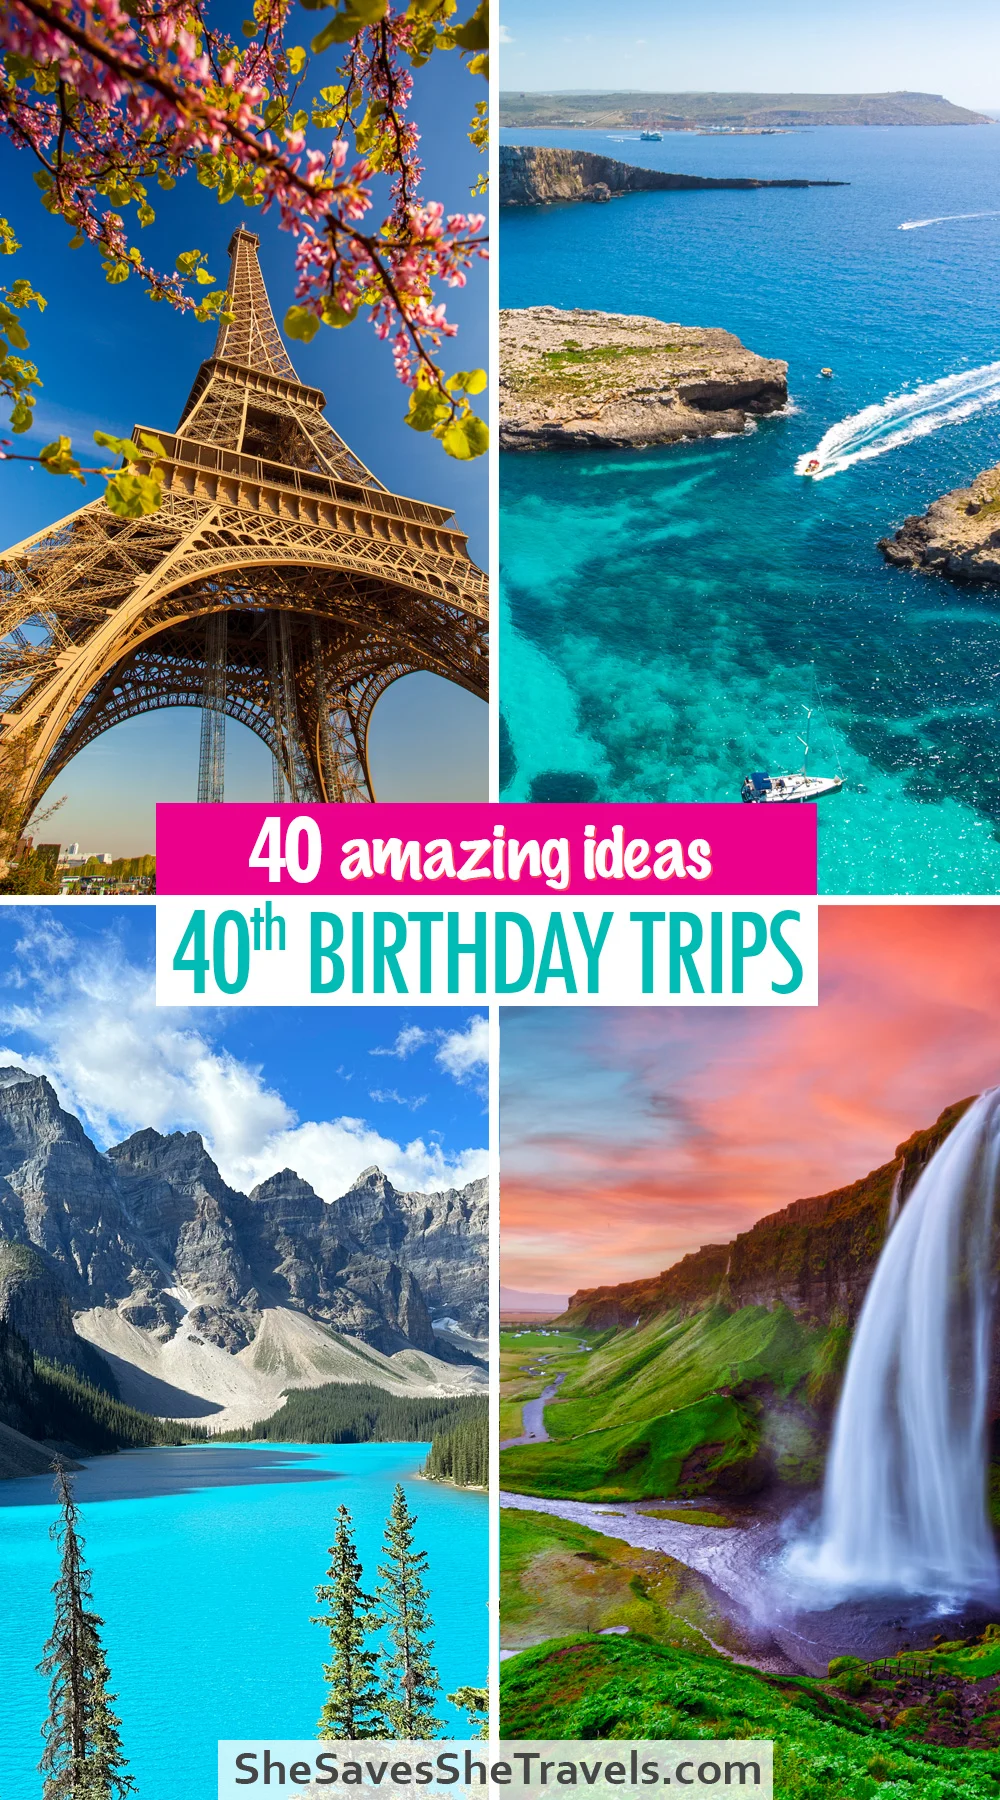 40 amazing ideas 40th birthday trips with photos of Eiffel Tower, blue ocean, teal mountain lake and waterfall at sunset